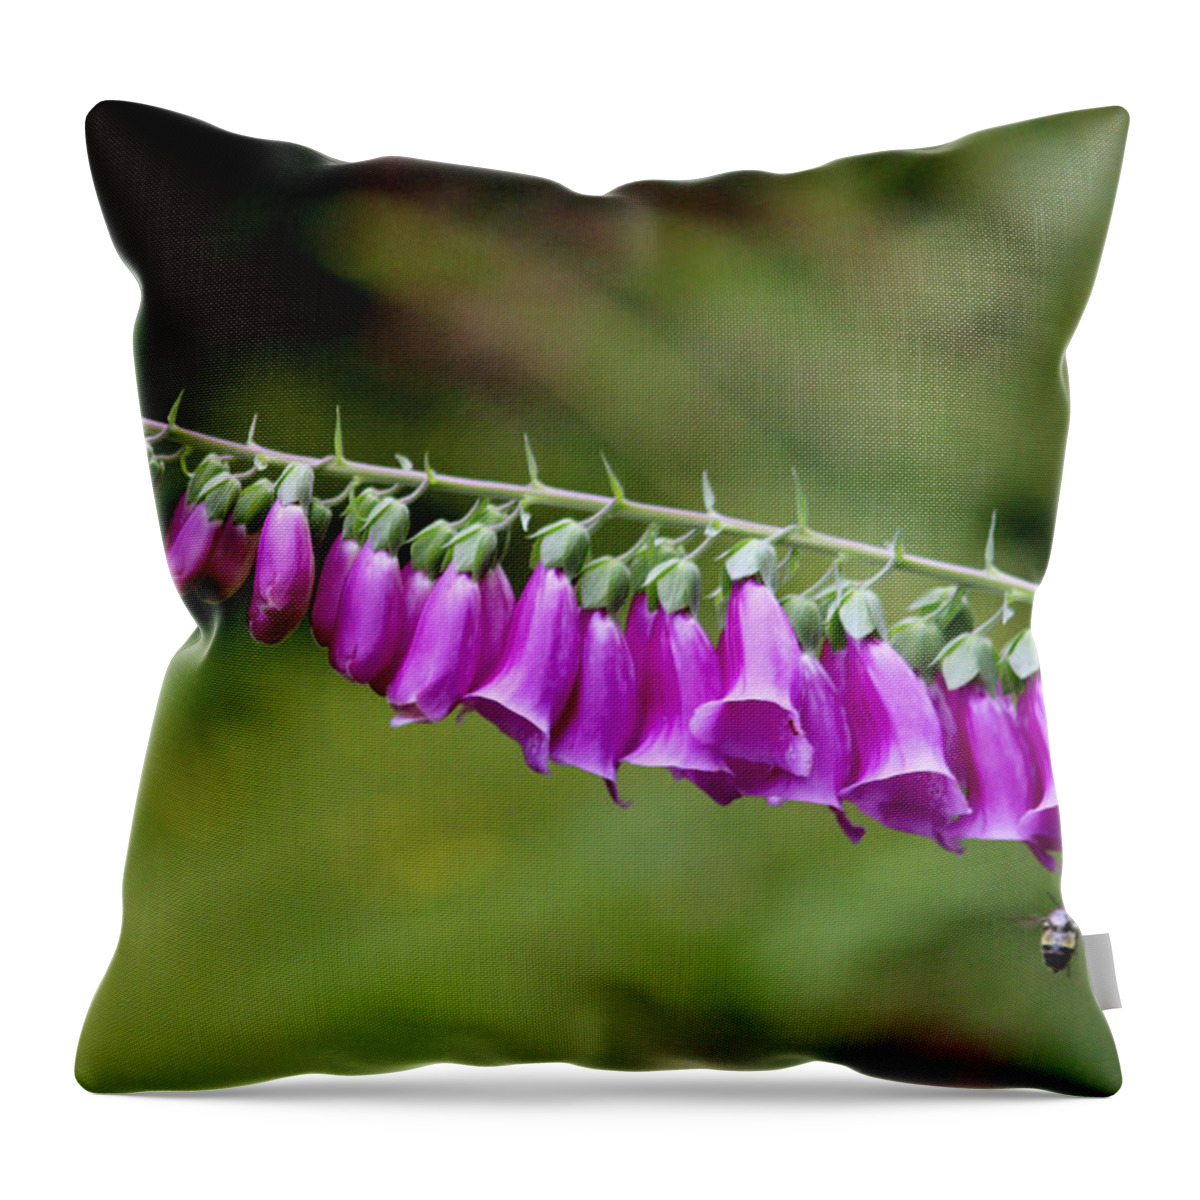 Flowers Throw Pillow featuring the photograph Foxglove went horizontal by Kym Backland